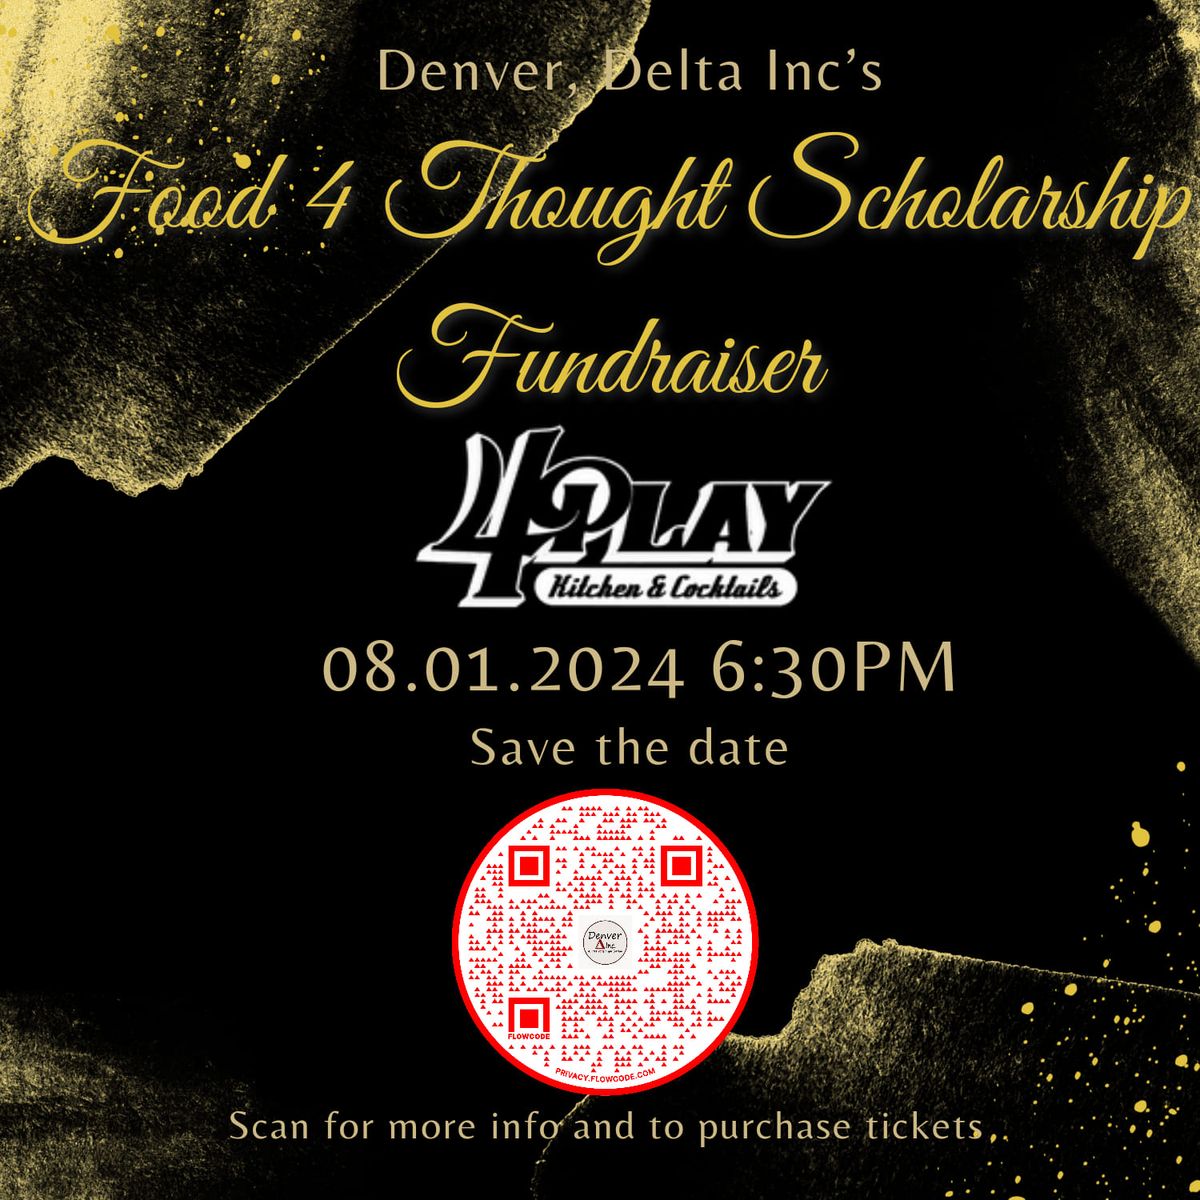 Food 4 Thought Scholarship Fundraiser